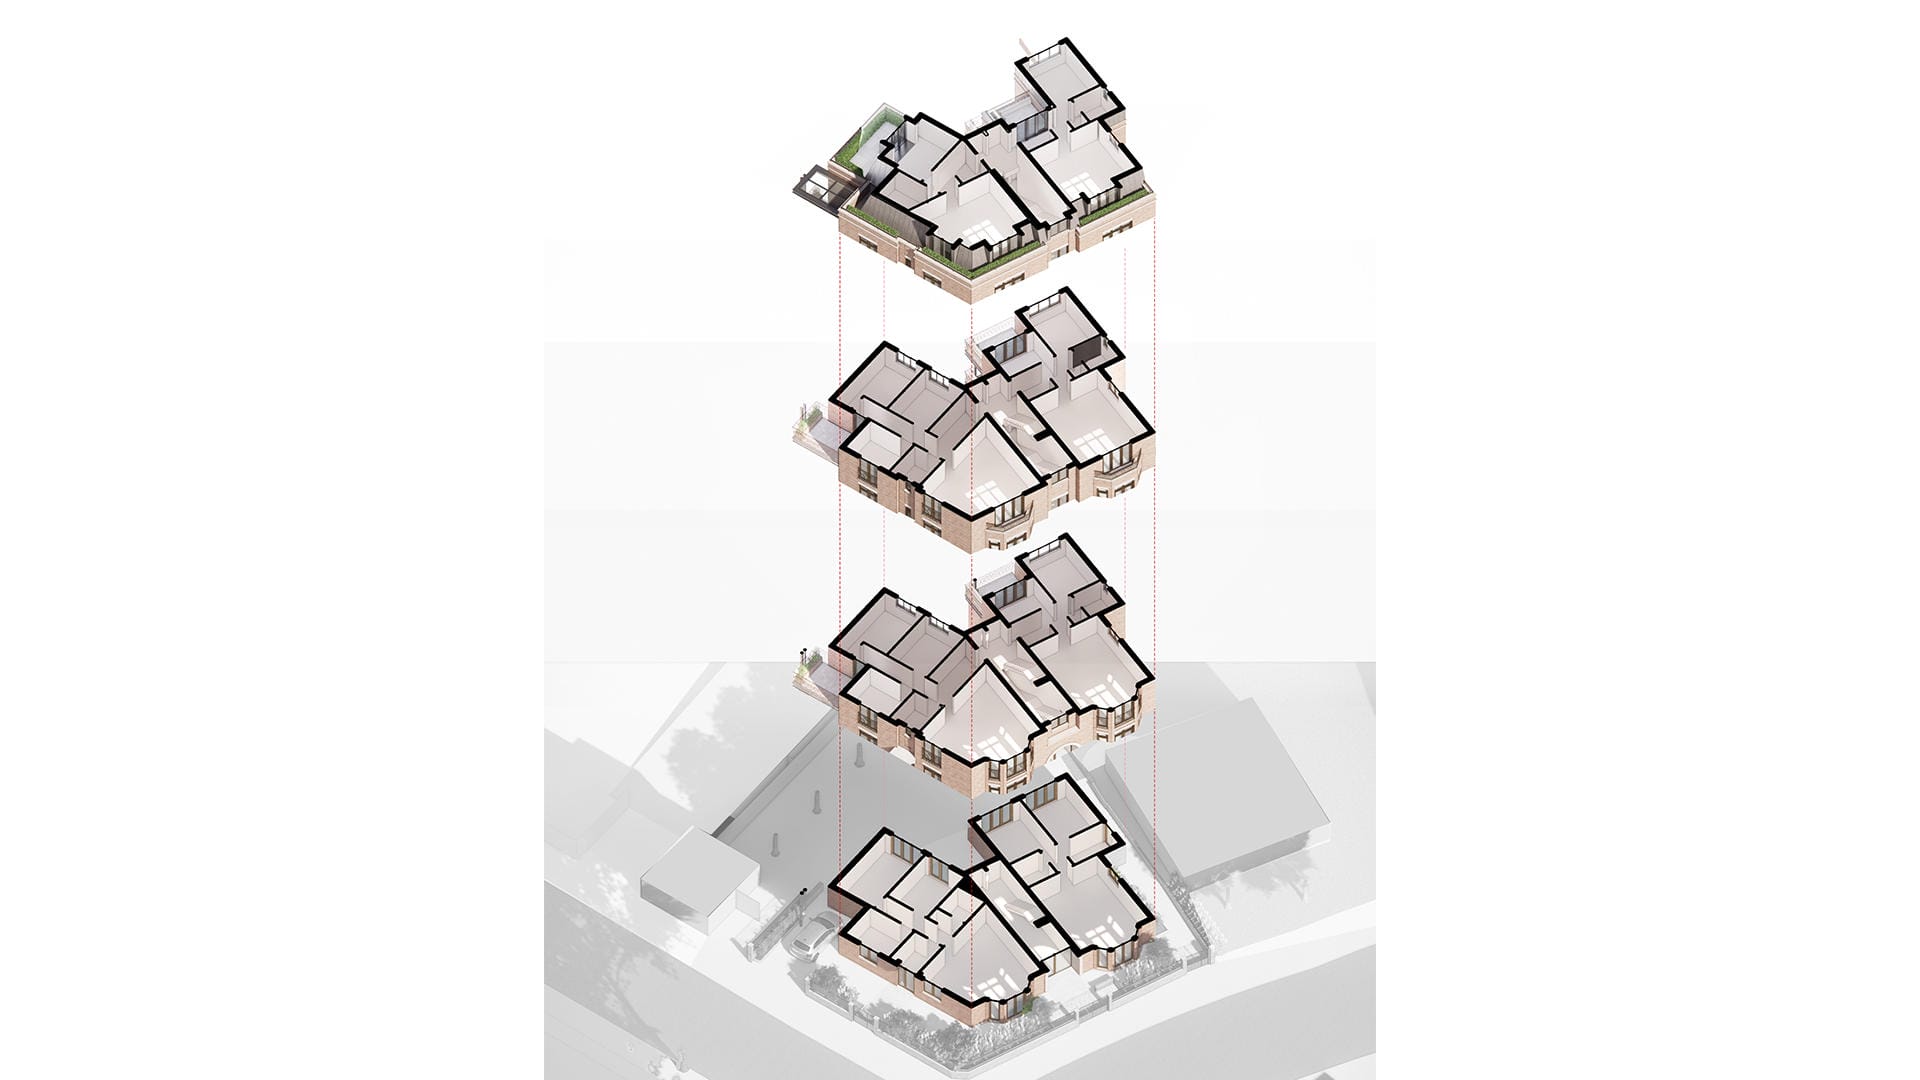 Cecil Road Exploded Isometric Plans